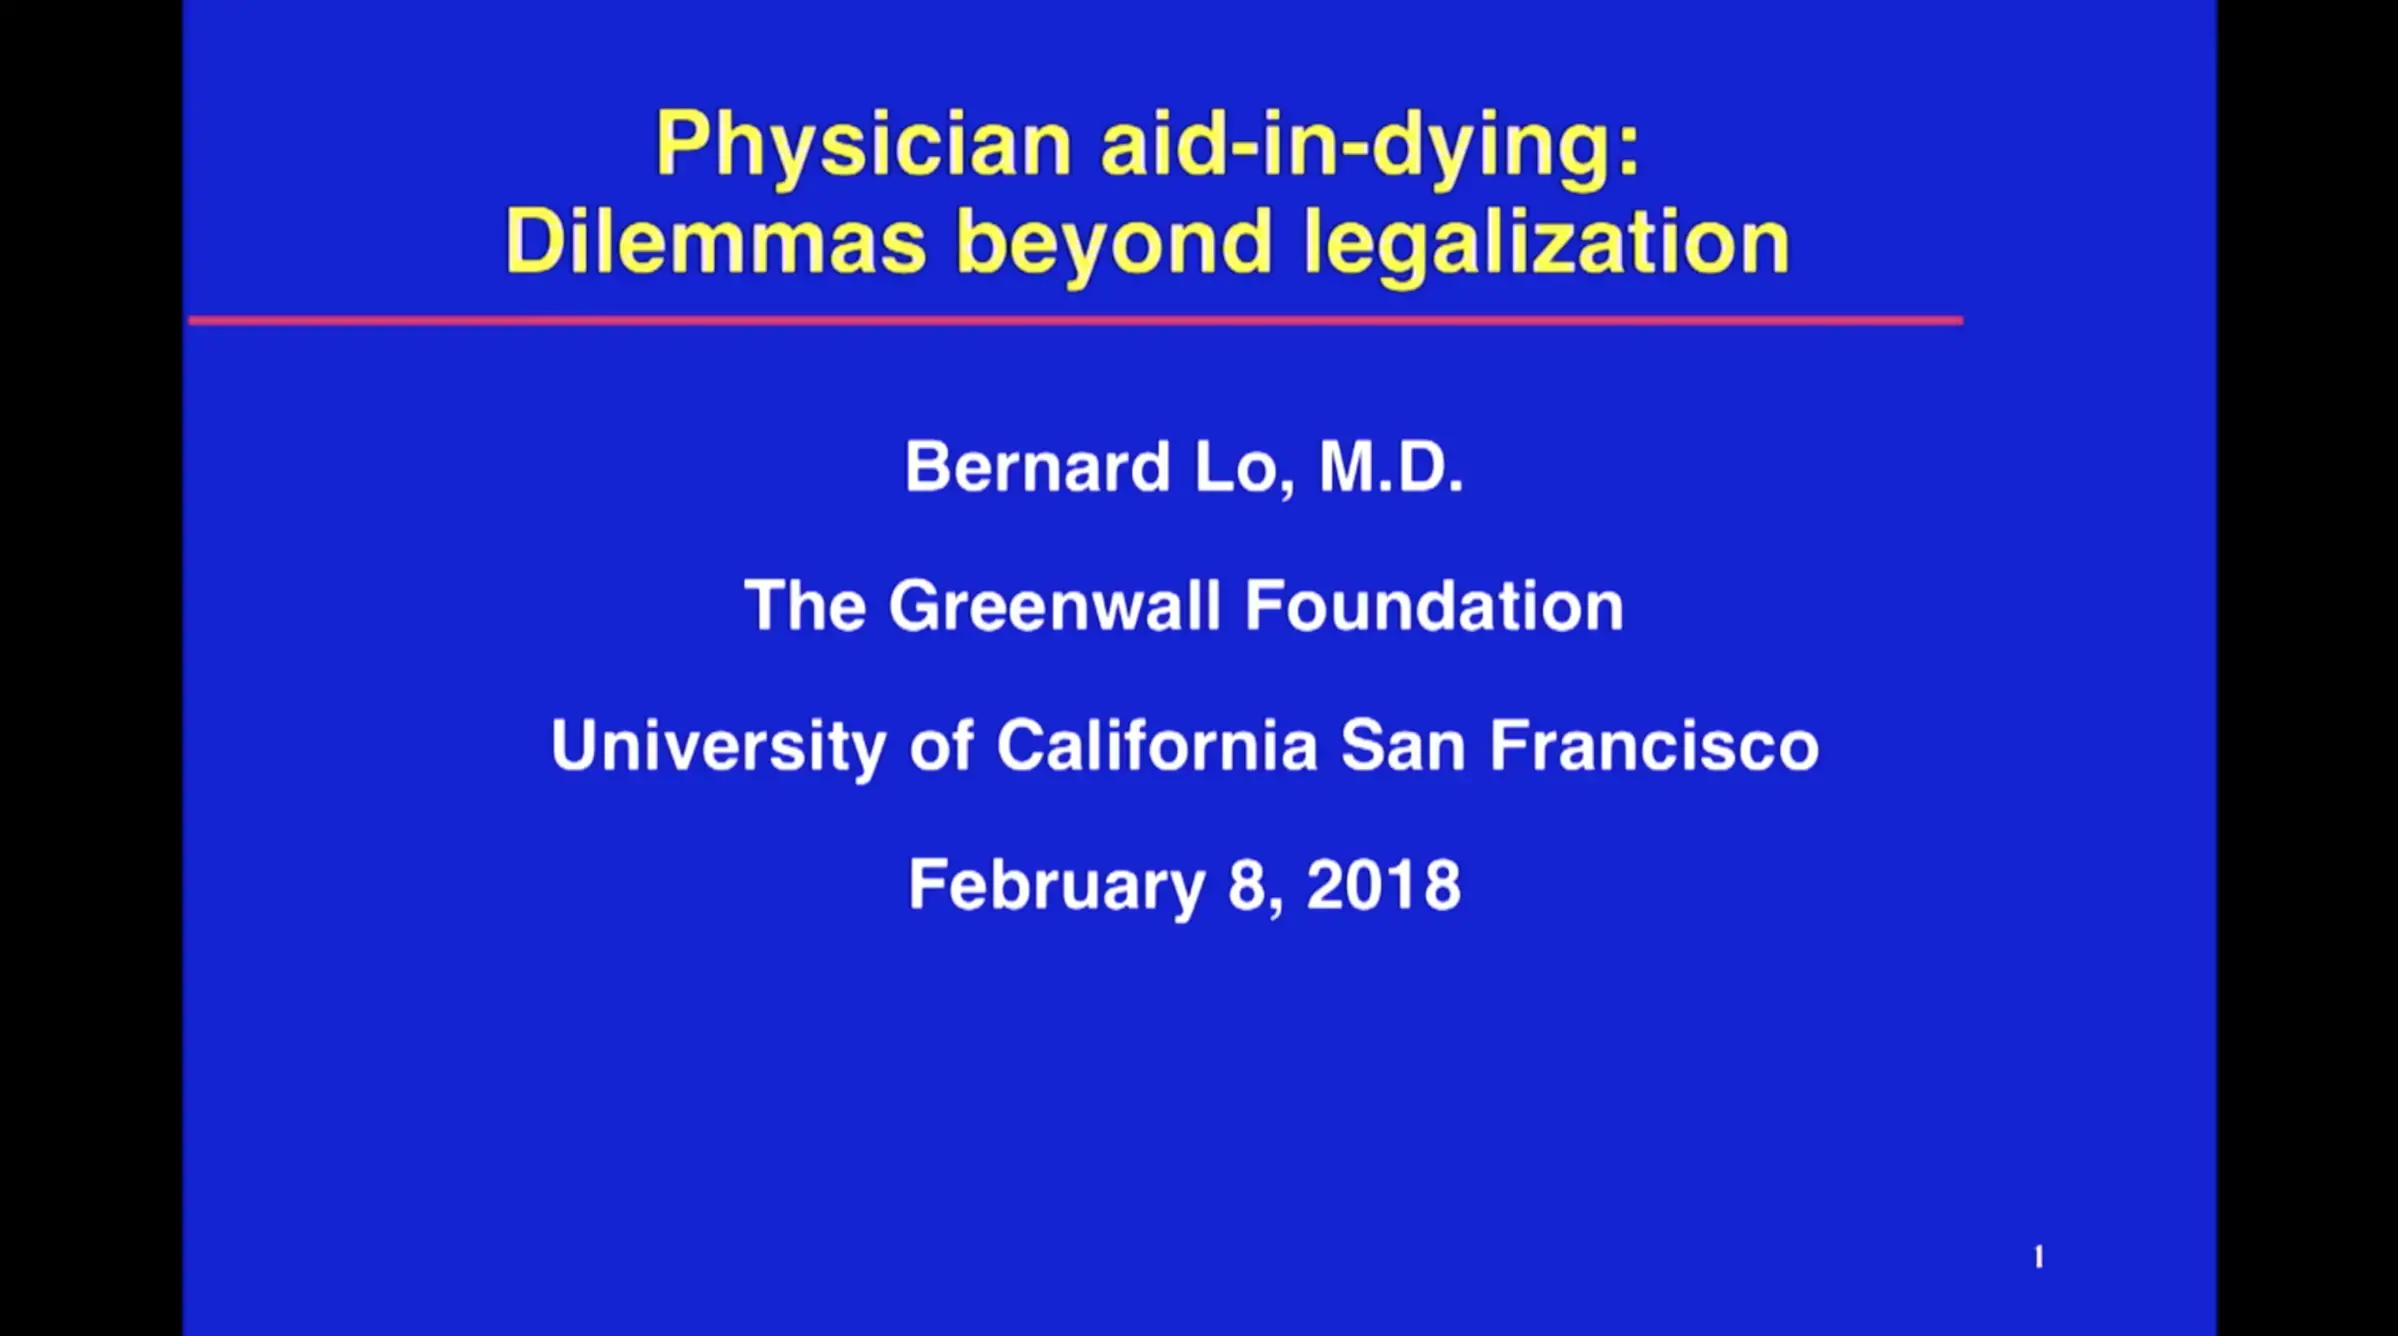 Click to play:  Bernard Lo on Clinical Dilemmas about Physician Aid-in-Dying 